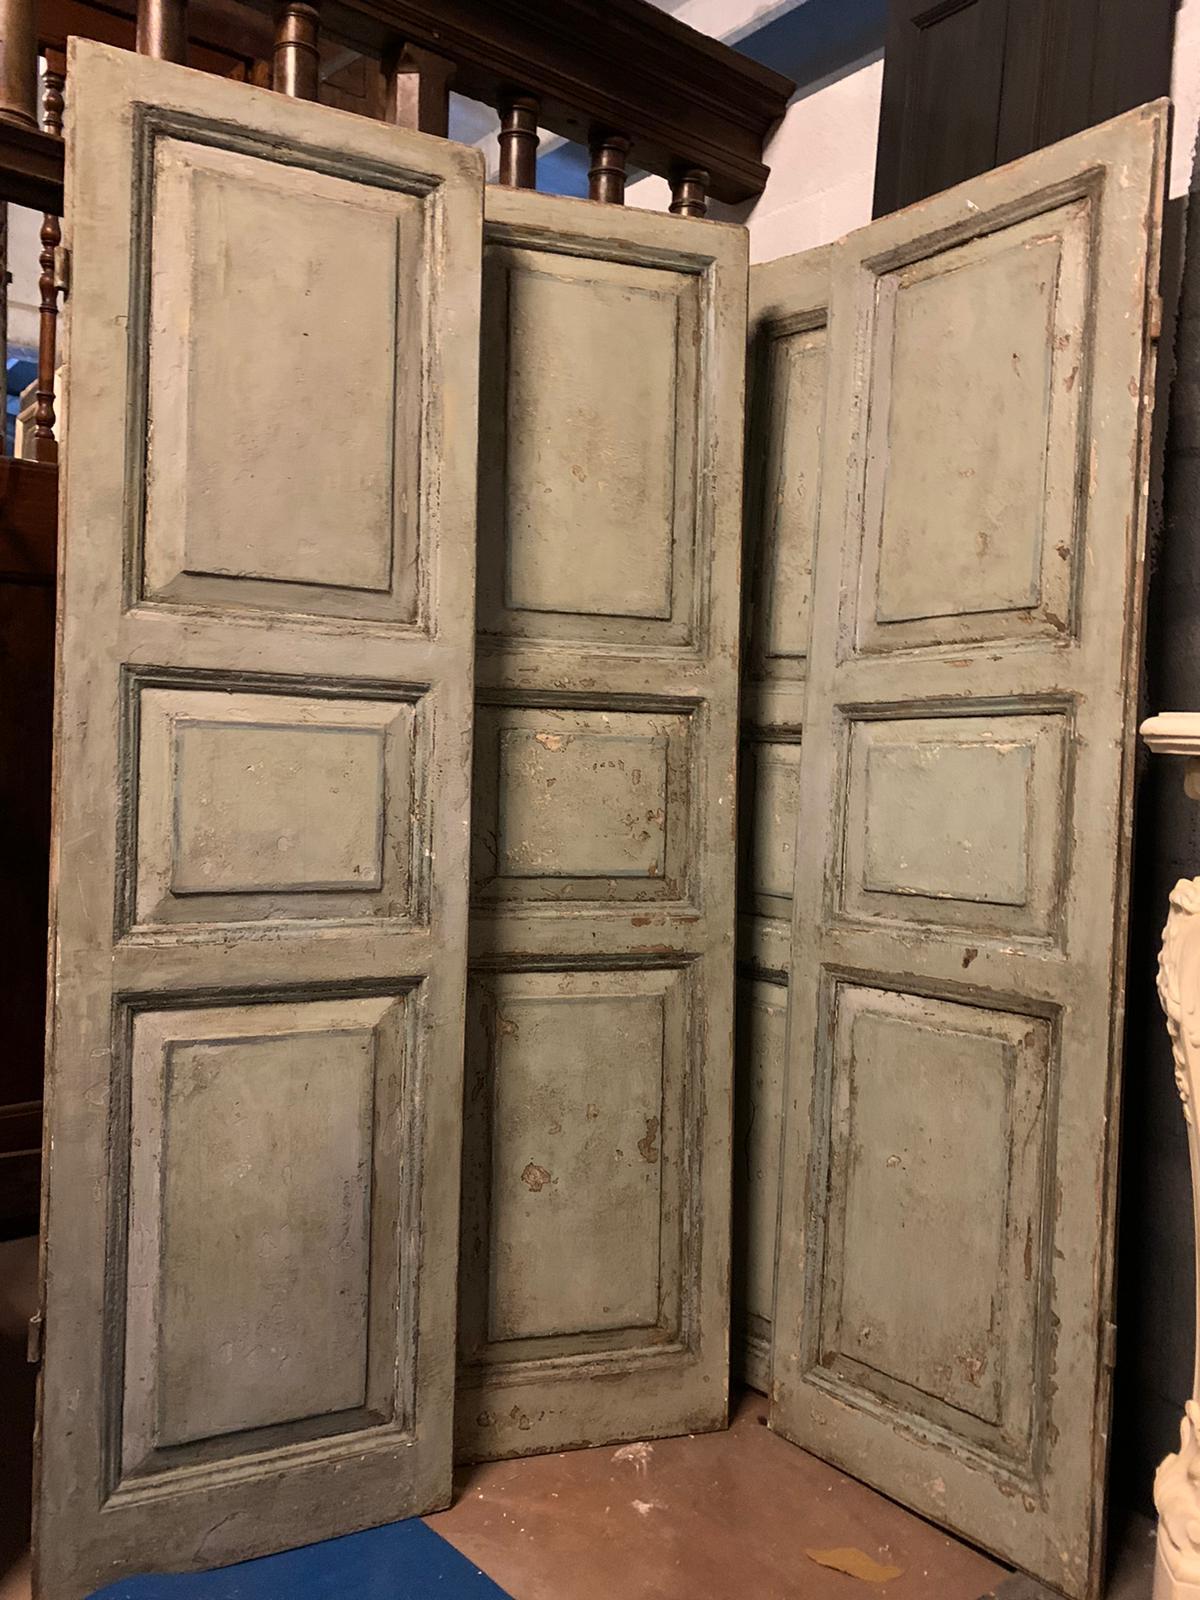 Set of 2 antique lacquered double-leaf doors, total of 4 doors that can be used as 2-by-2 doors, hand-lacquered and patinated by time, powder blue color, hand-built in the early 19th century for home in Italy, back also finished and lacquered, they